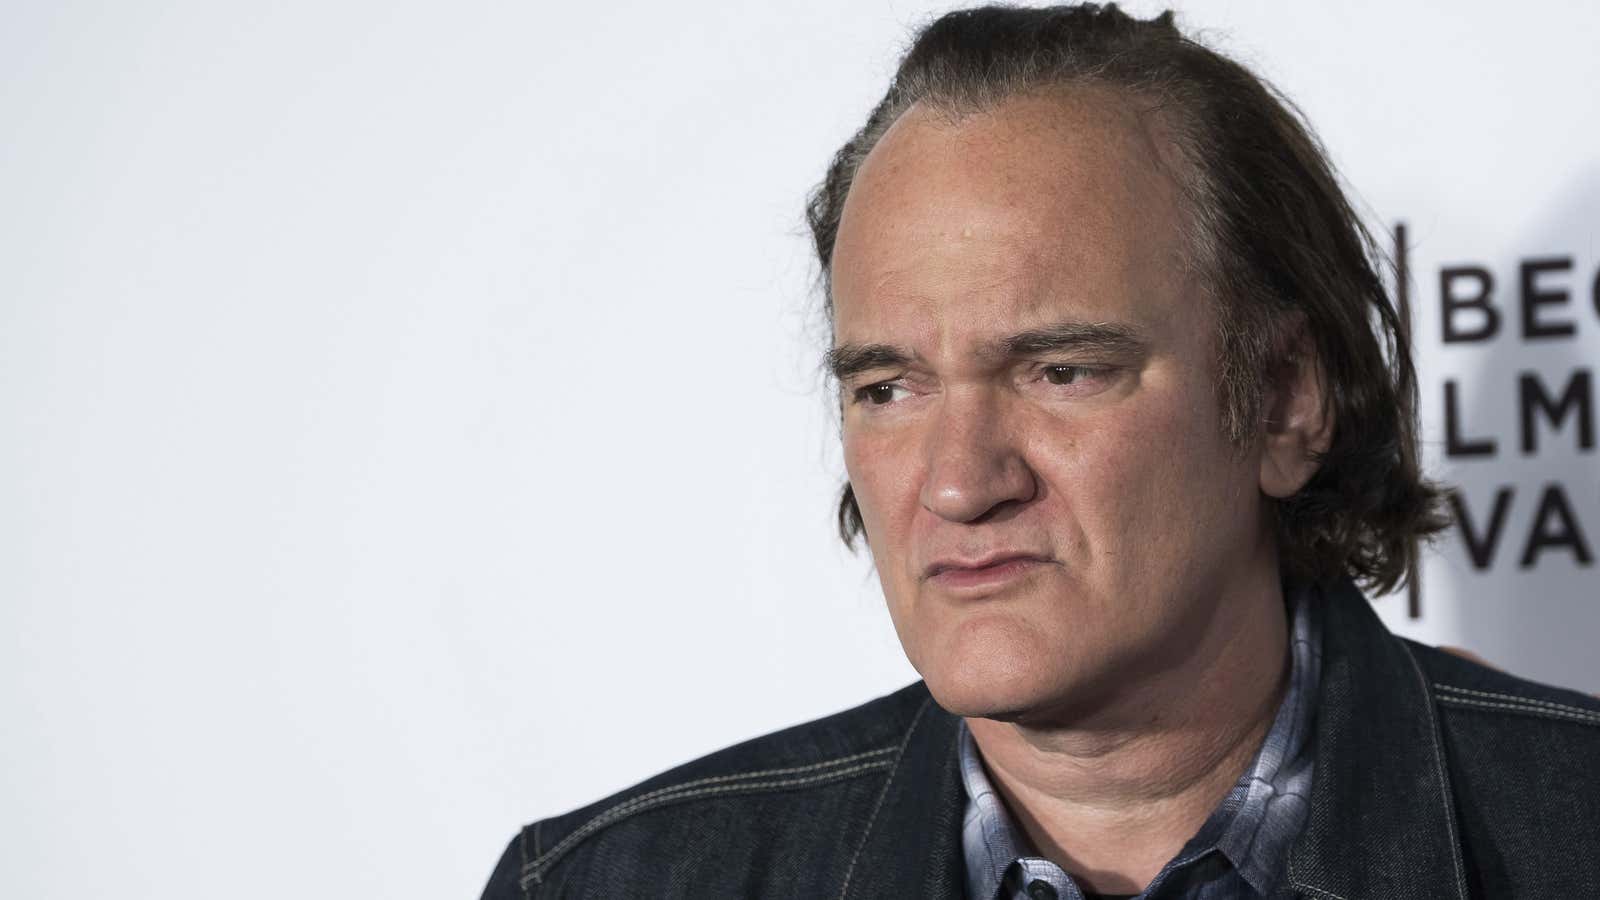 The clip comes in the midst of ongoing backlash against Tarantino for his relationship with Harvey Weinstein.